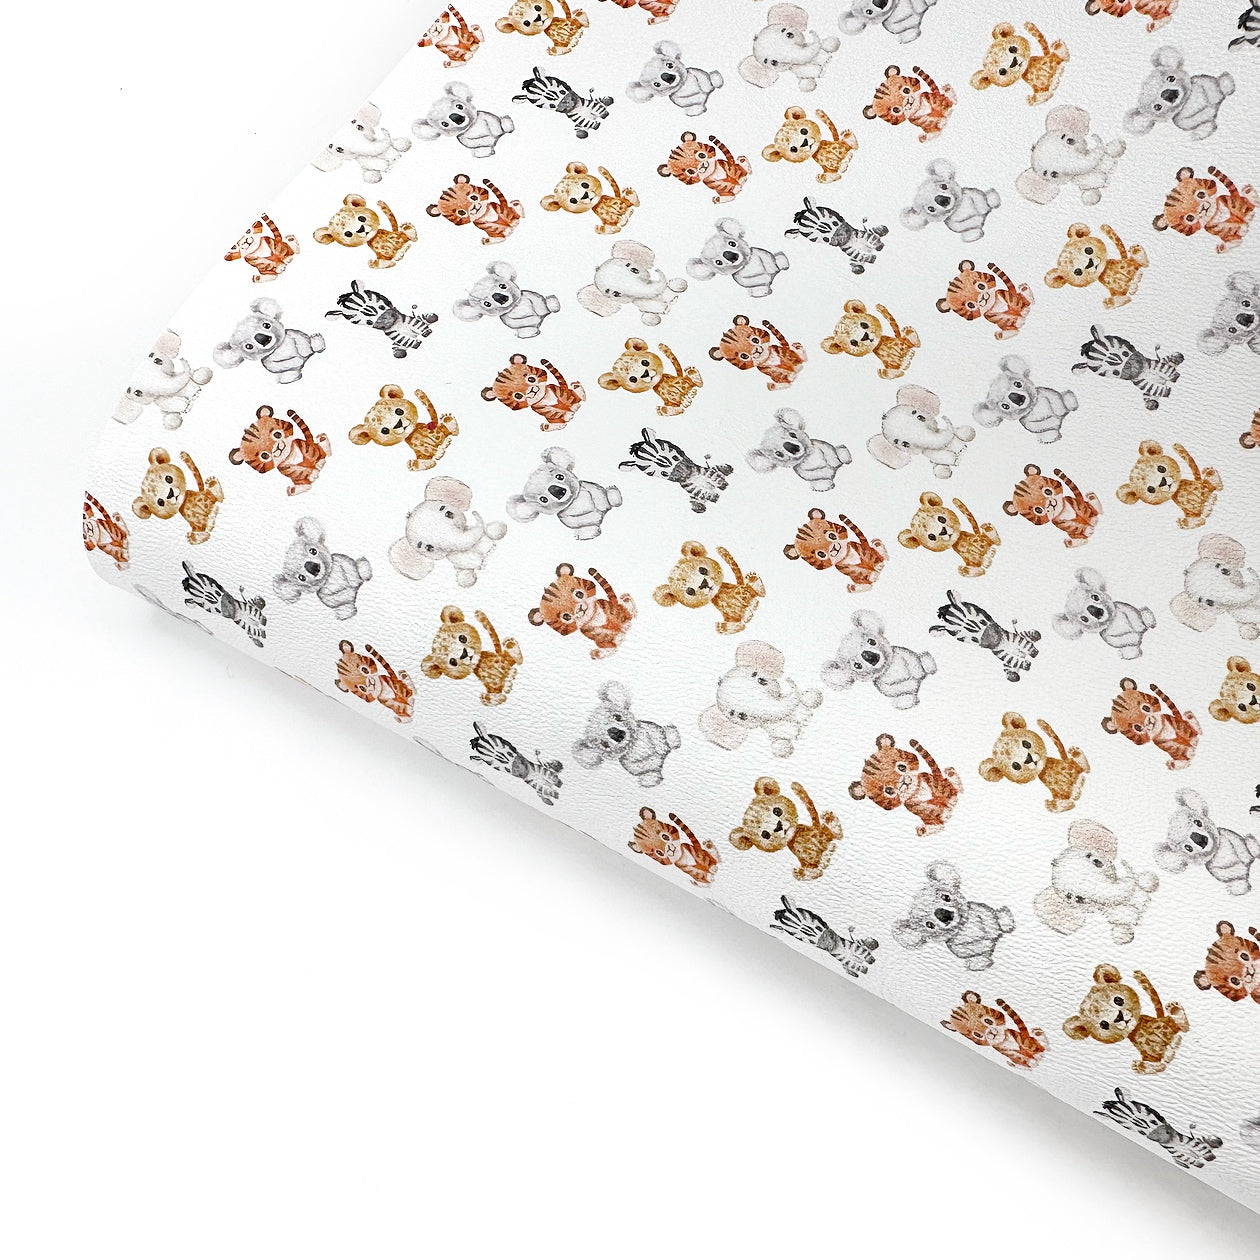 Zoo Babies Premium Faux Leather Fabric Sheets